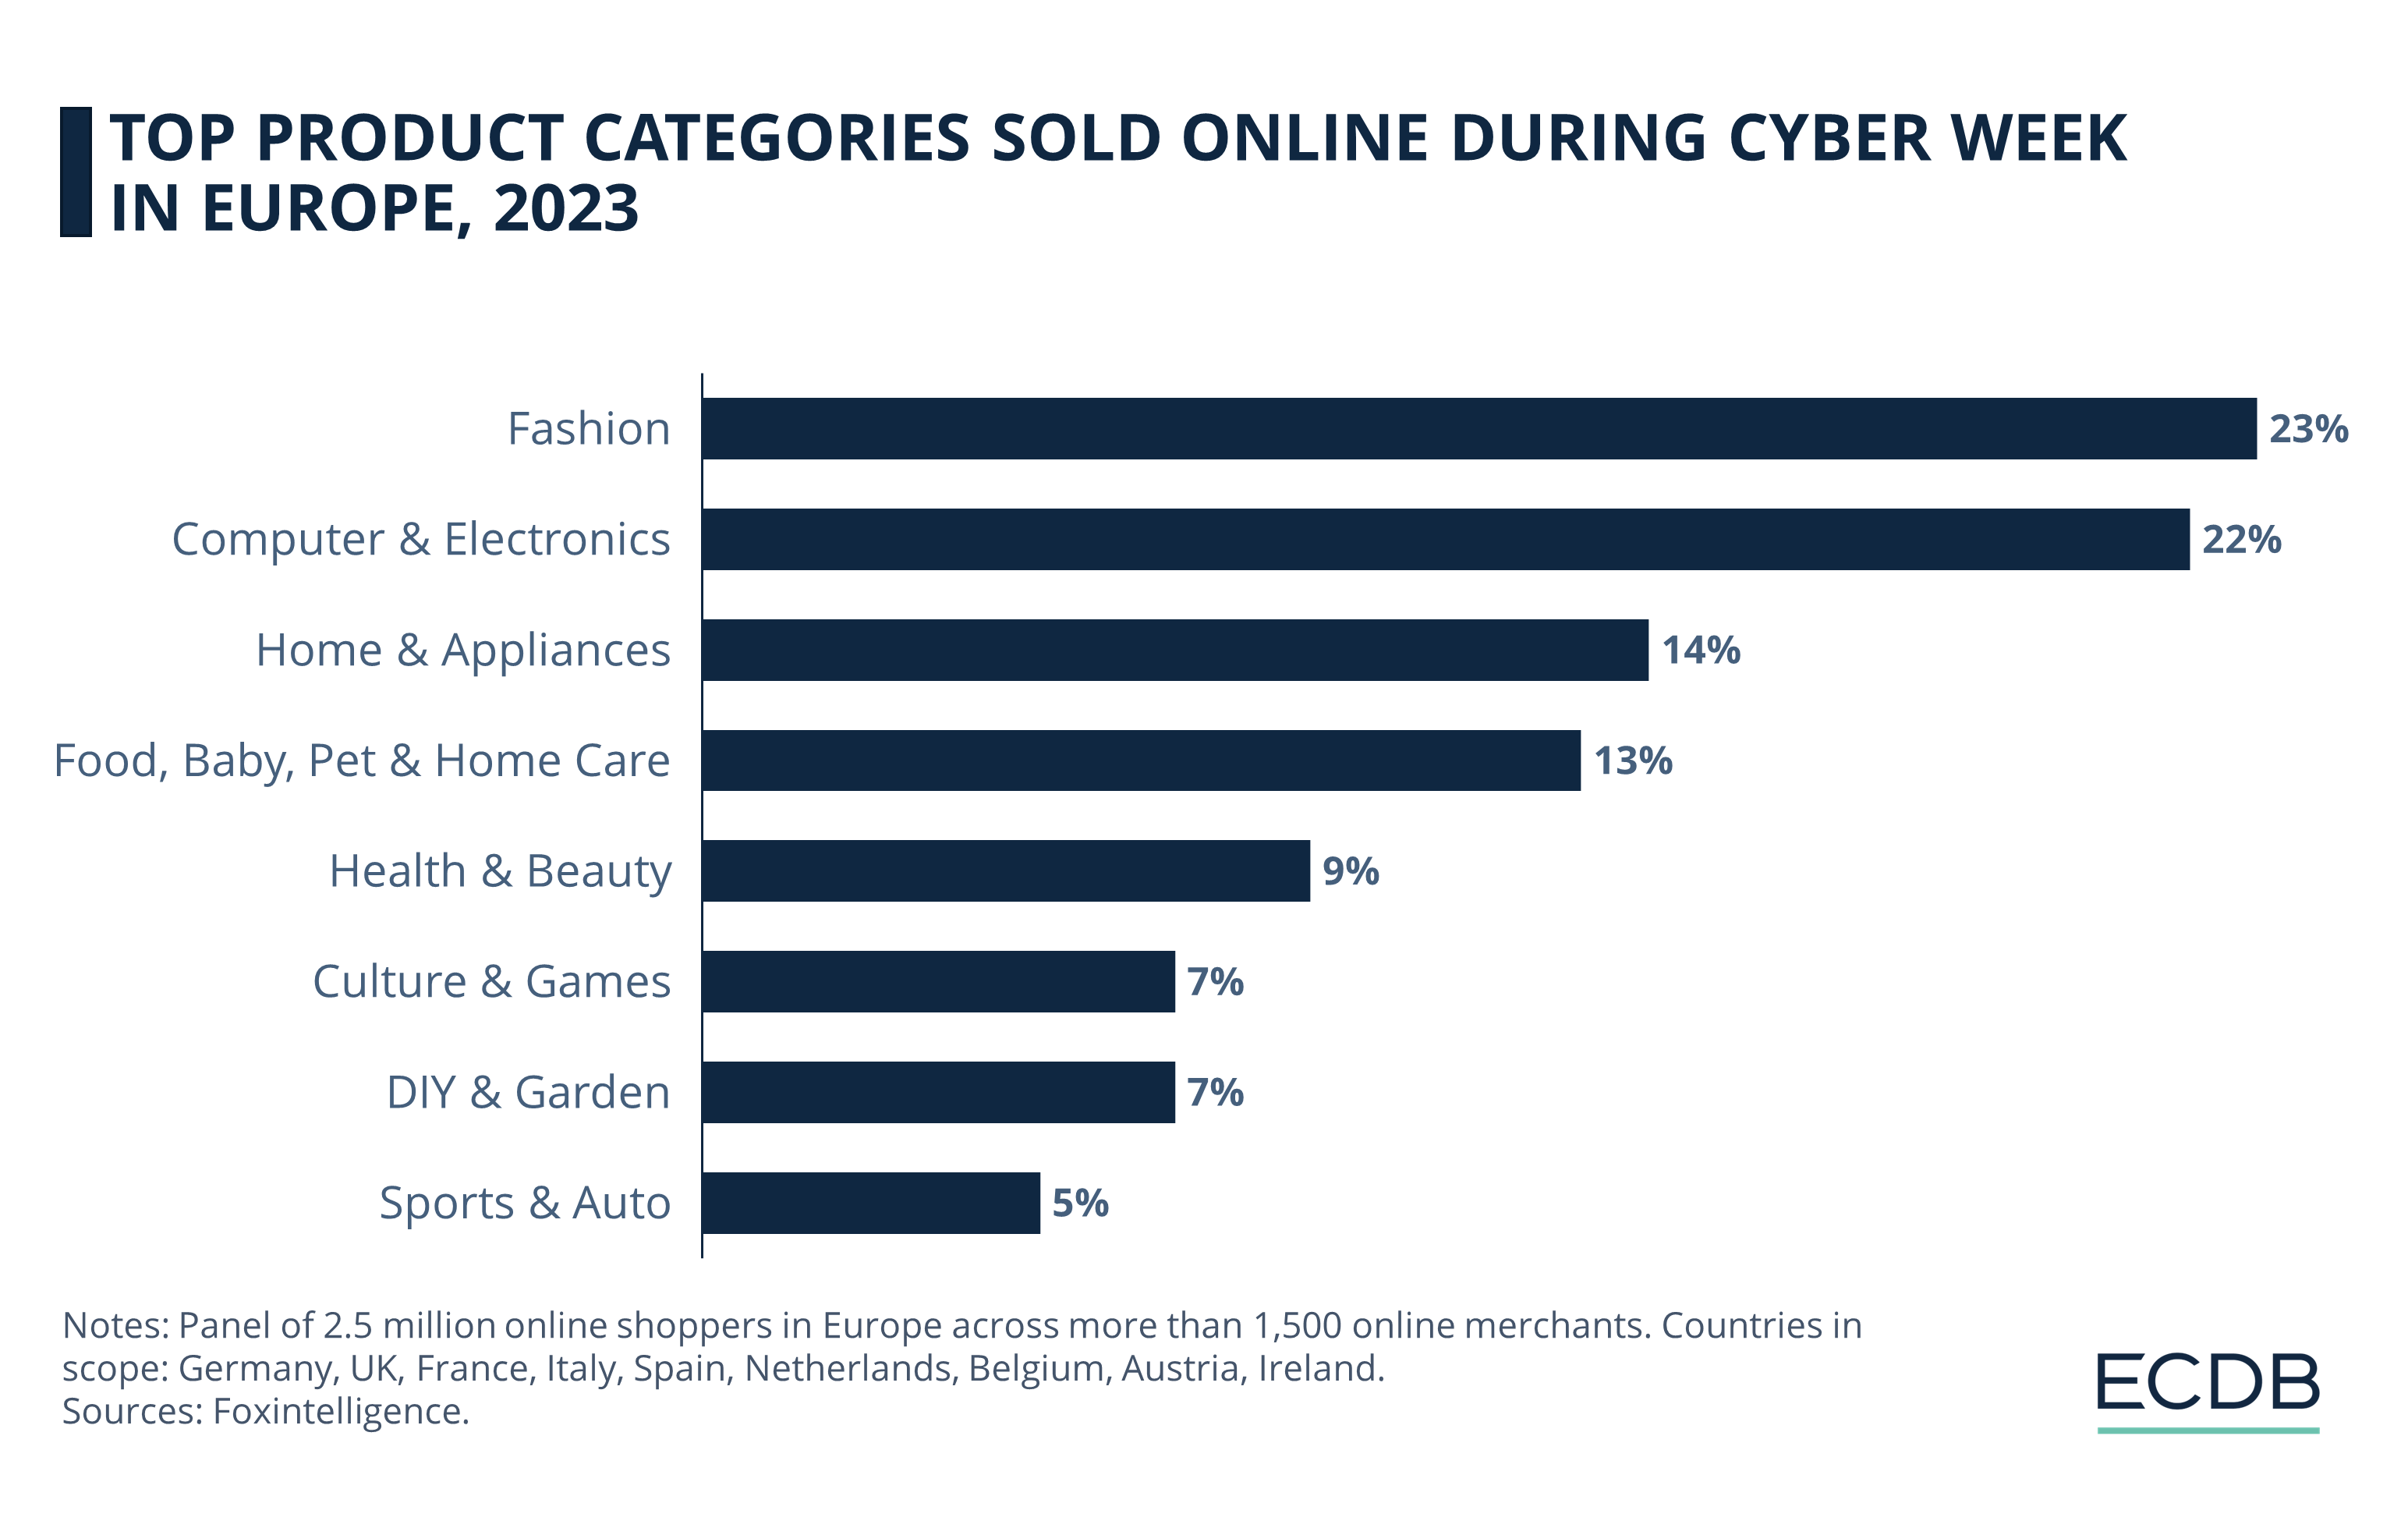 Top Product Categories Sold Online During Cyber Week in Europe, 2023